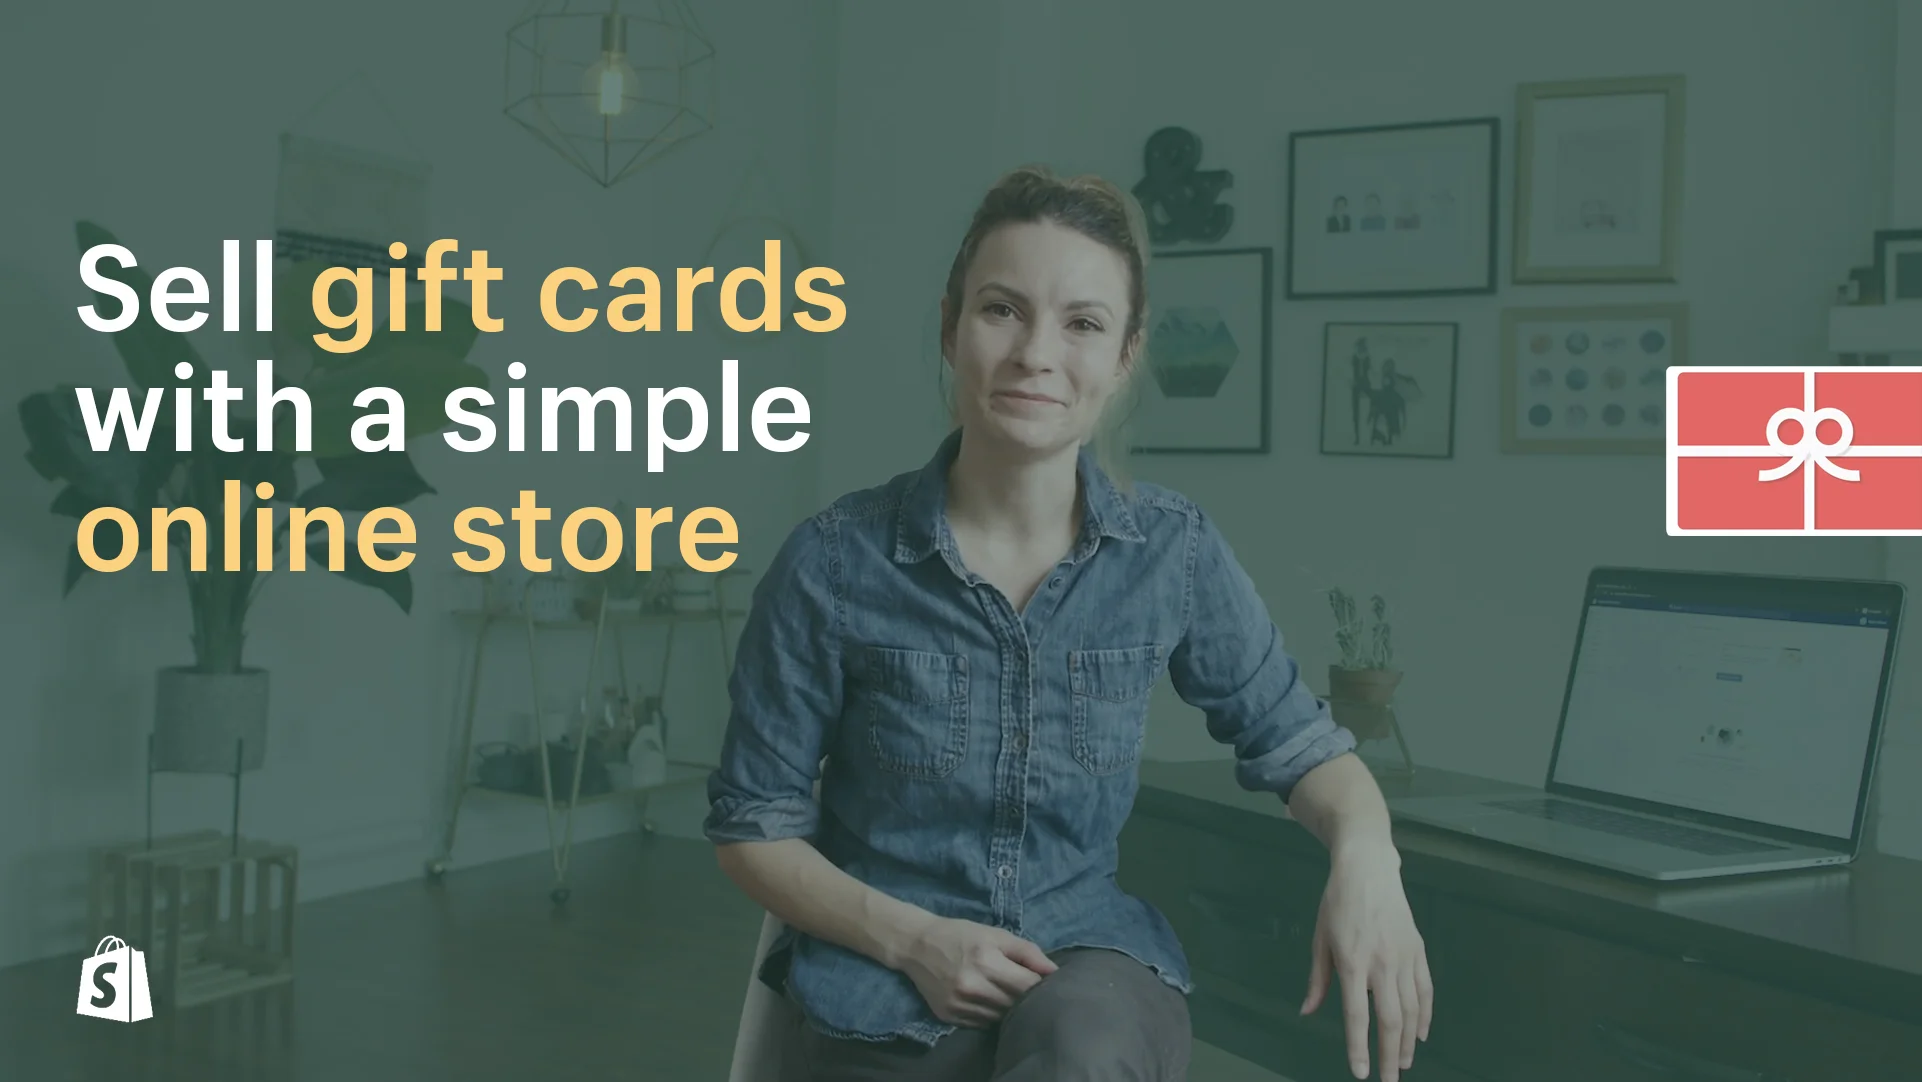 Riseai Gift Cards  Loyalty  Gift Card Loyalty Programs Referrals  Store Credit  Rewards  Shopify App Store